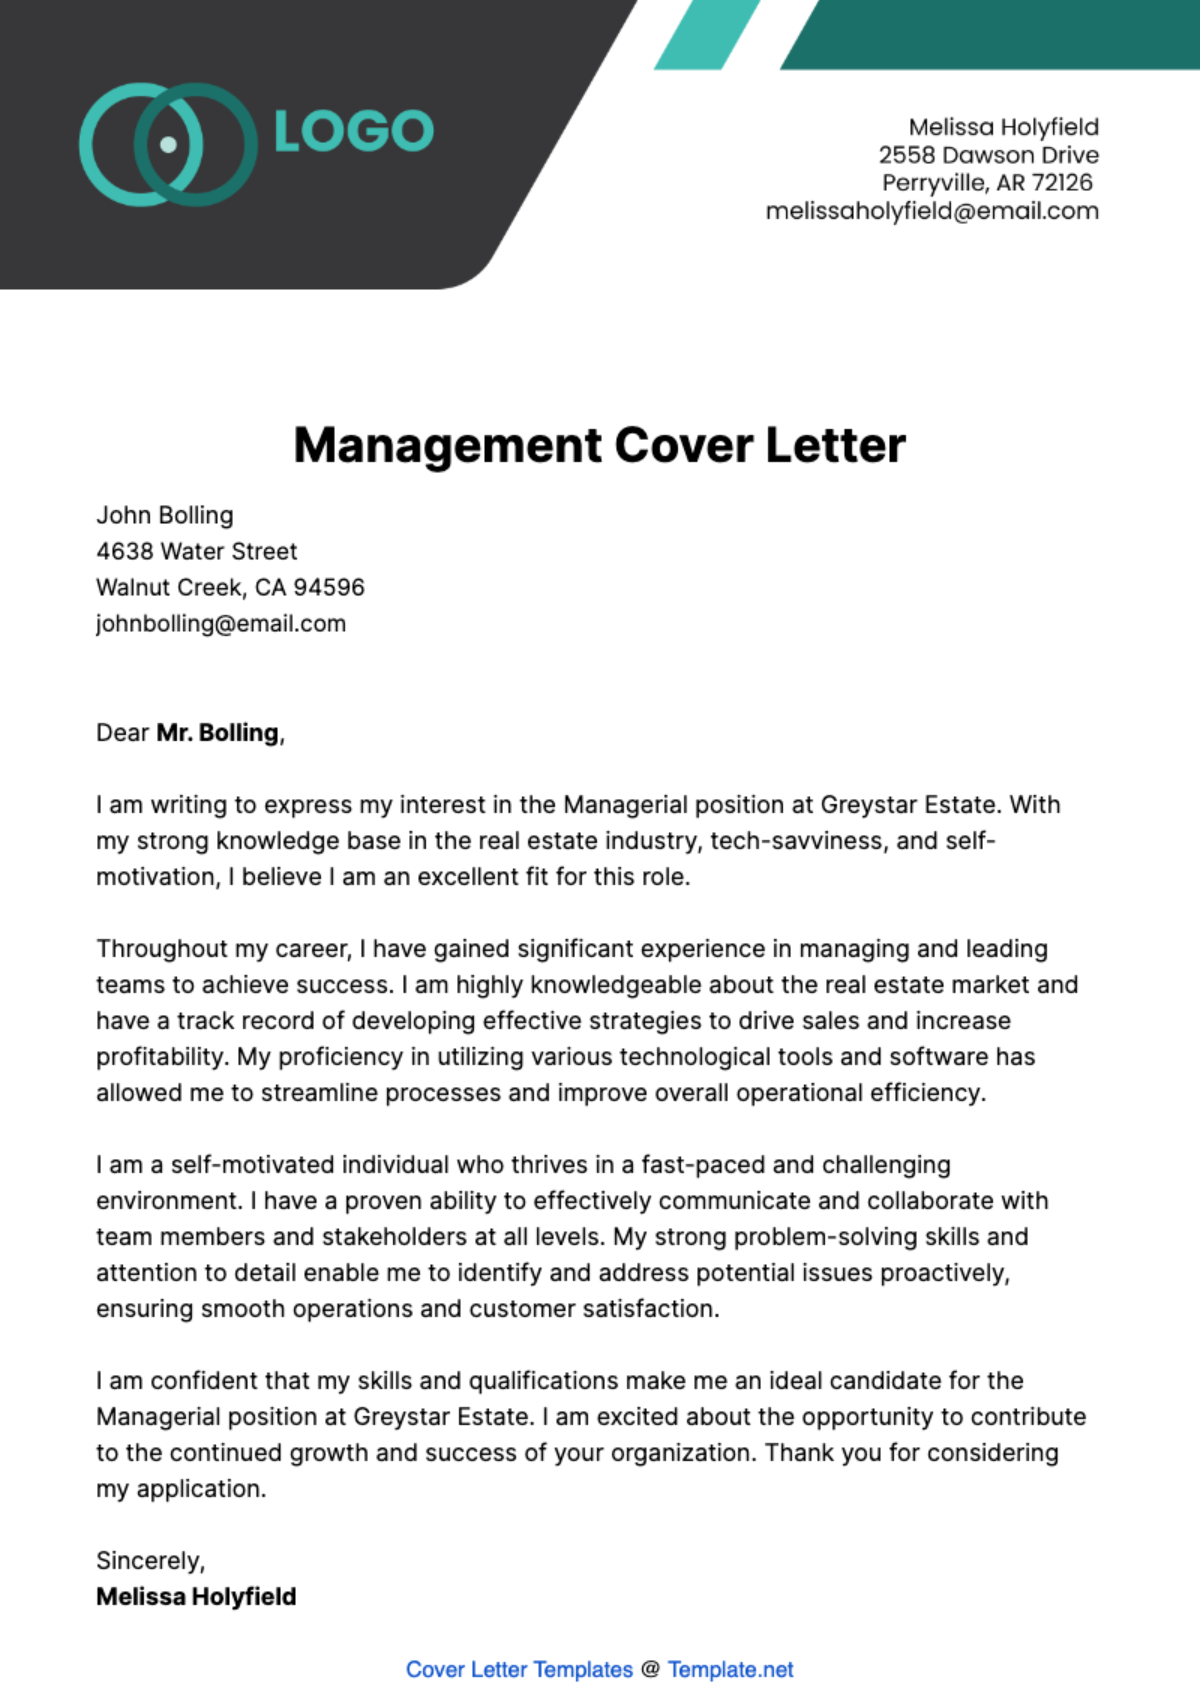 Free Management Cover Letter  Template